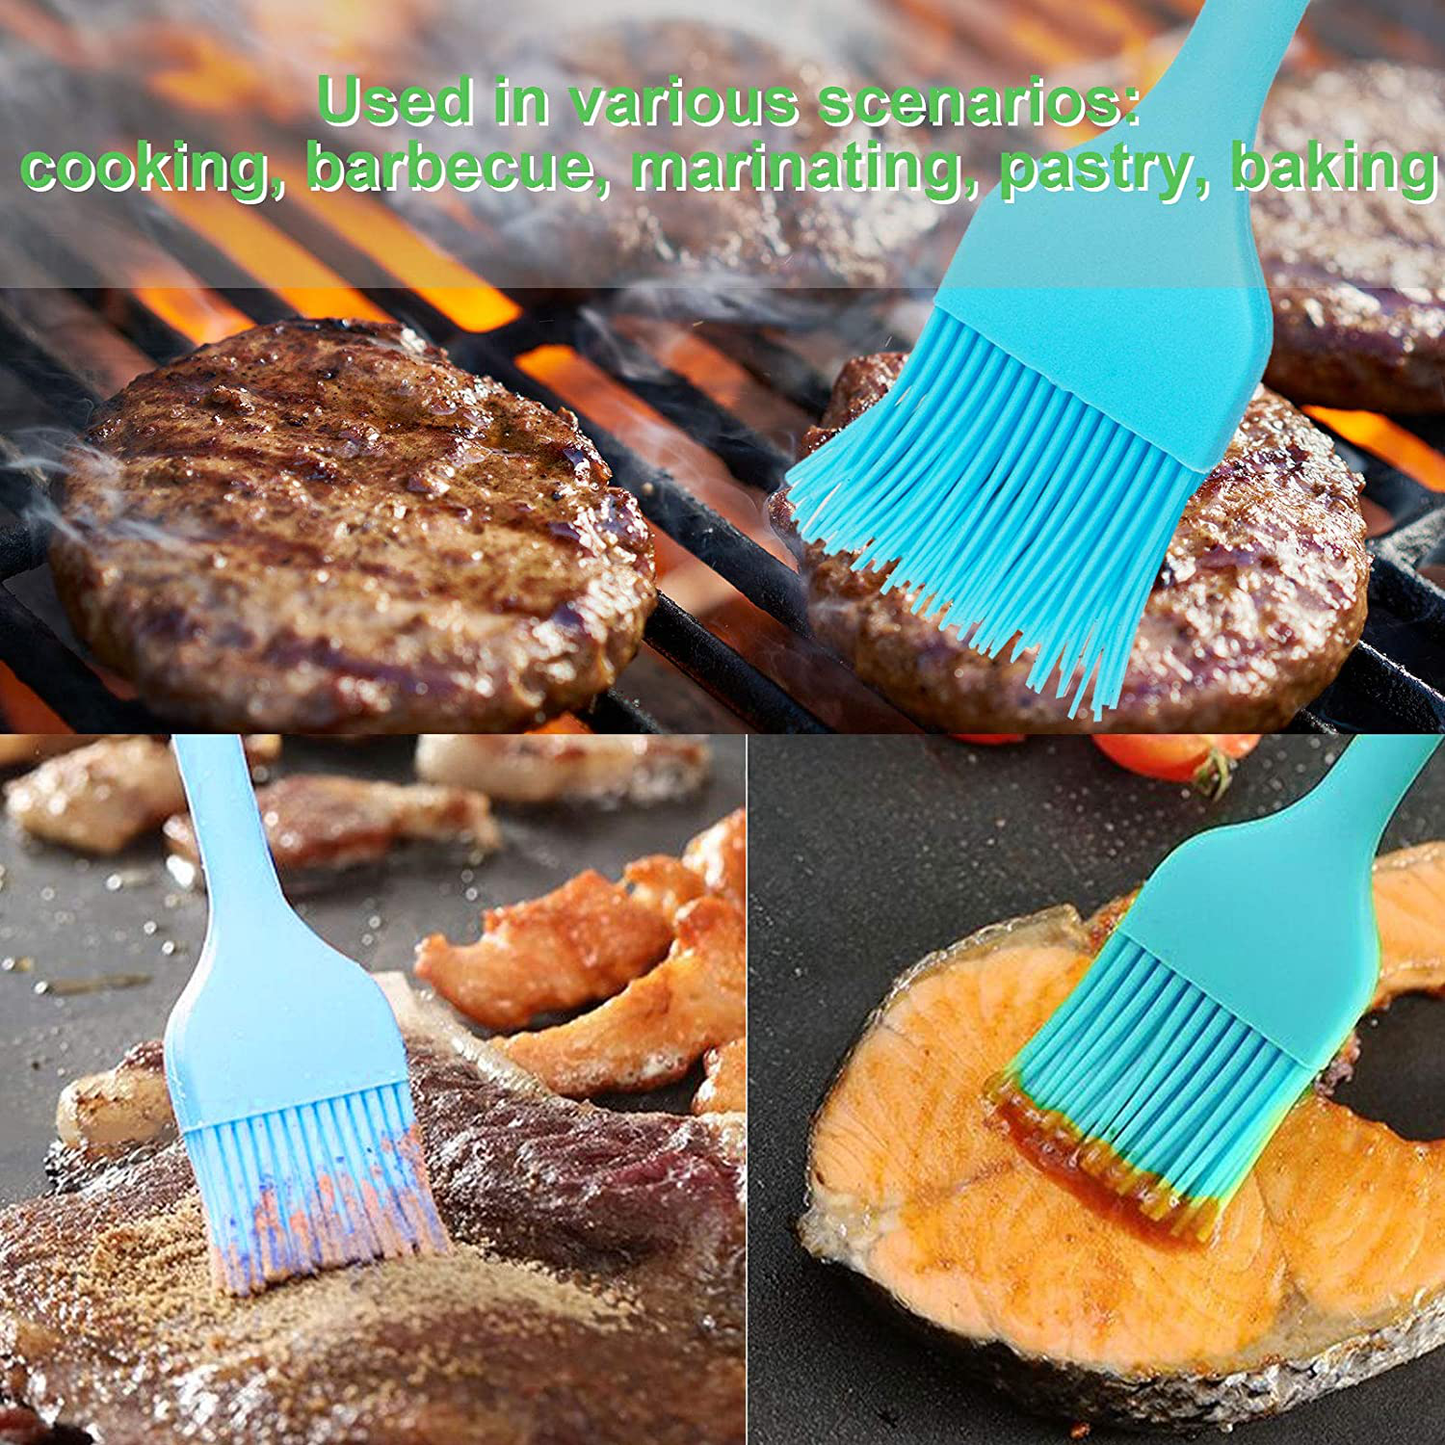 Silicone Basting Brush, Premium Baking Brush - for Cooking, Grilling & Marinating, BBQ, Pastry, Sauce, Butter, Oil, Turkey and Desserts Baking - Heat Resistant Barbecue Utensil, Set of 2